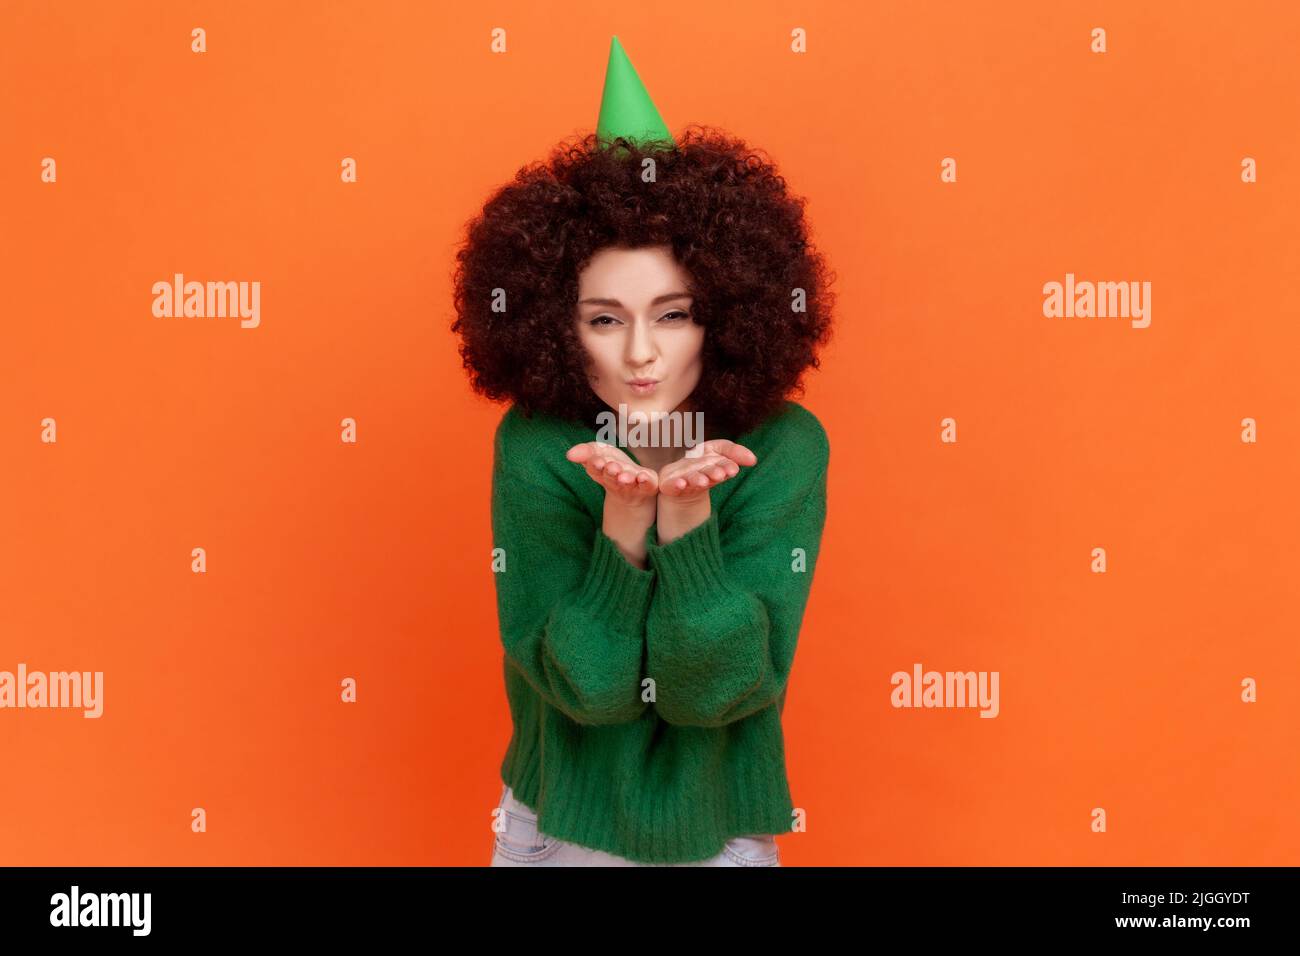 Happy birthday woman with Afro hairstyle wearing green casual style sweater thanks for the congratulations, sending air kisses to her guests. Indoor studio shot isolated on orange background. Stock Photo